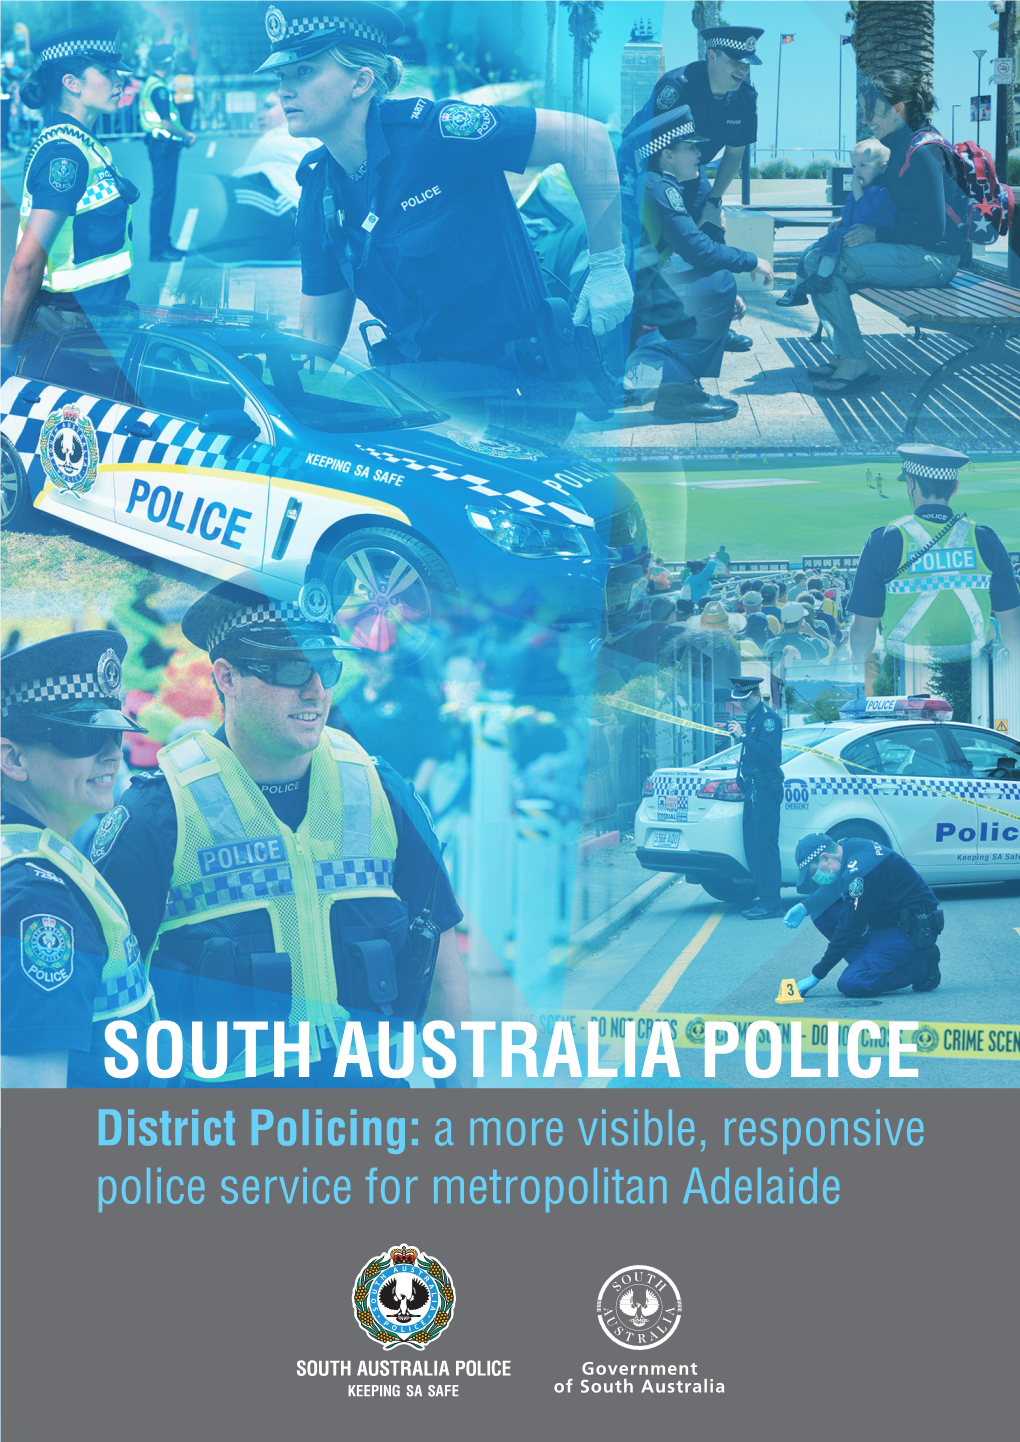 SOUTH AUSTRALIA POLICE District Policing: a More Visible, Responsive Police Service for Metropolitan Adelaide COMMISSIONER’S FOREWORD